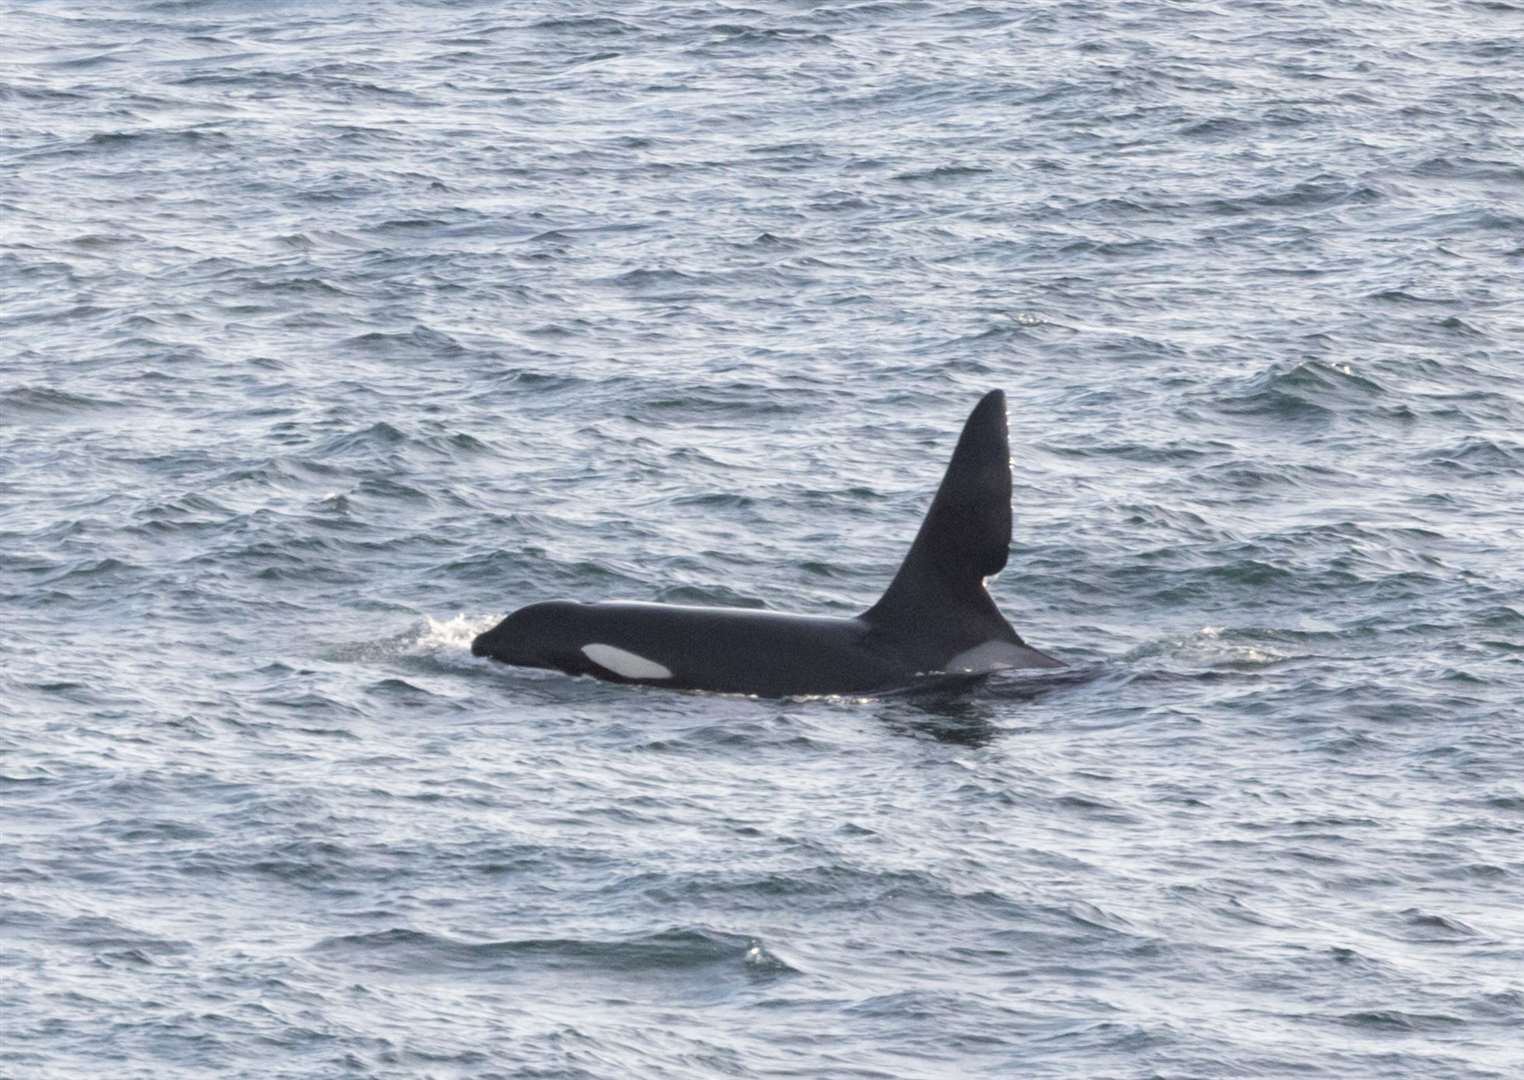 West coast orca John Coe photographed from Sarclet on Thursday. Picture: Karen Munro